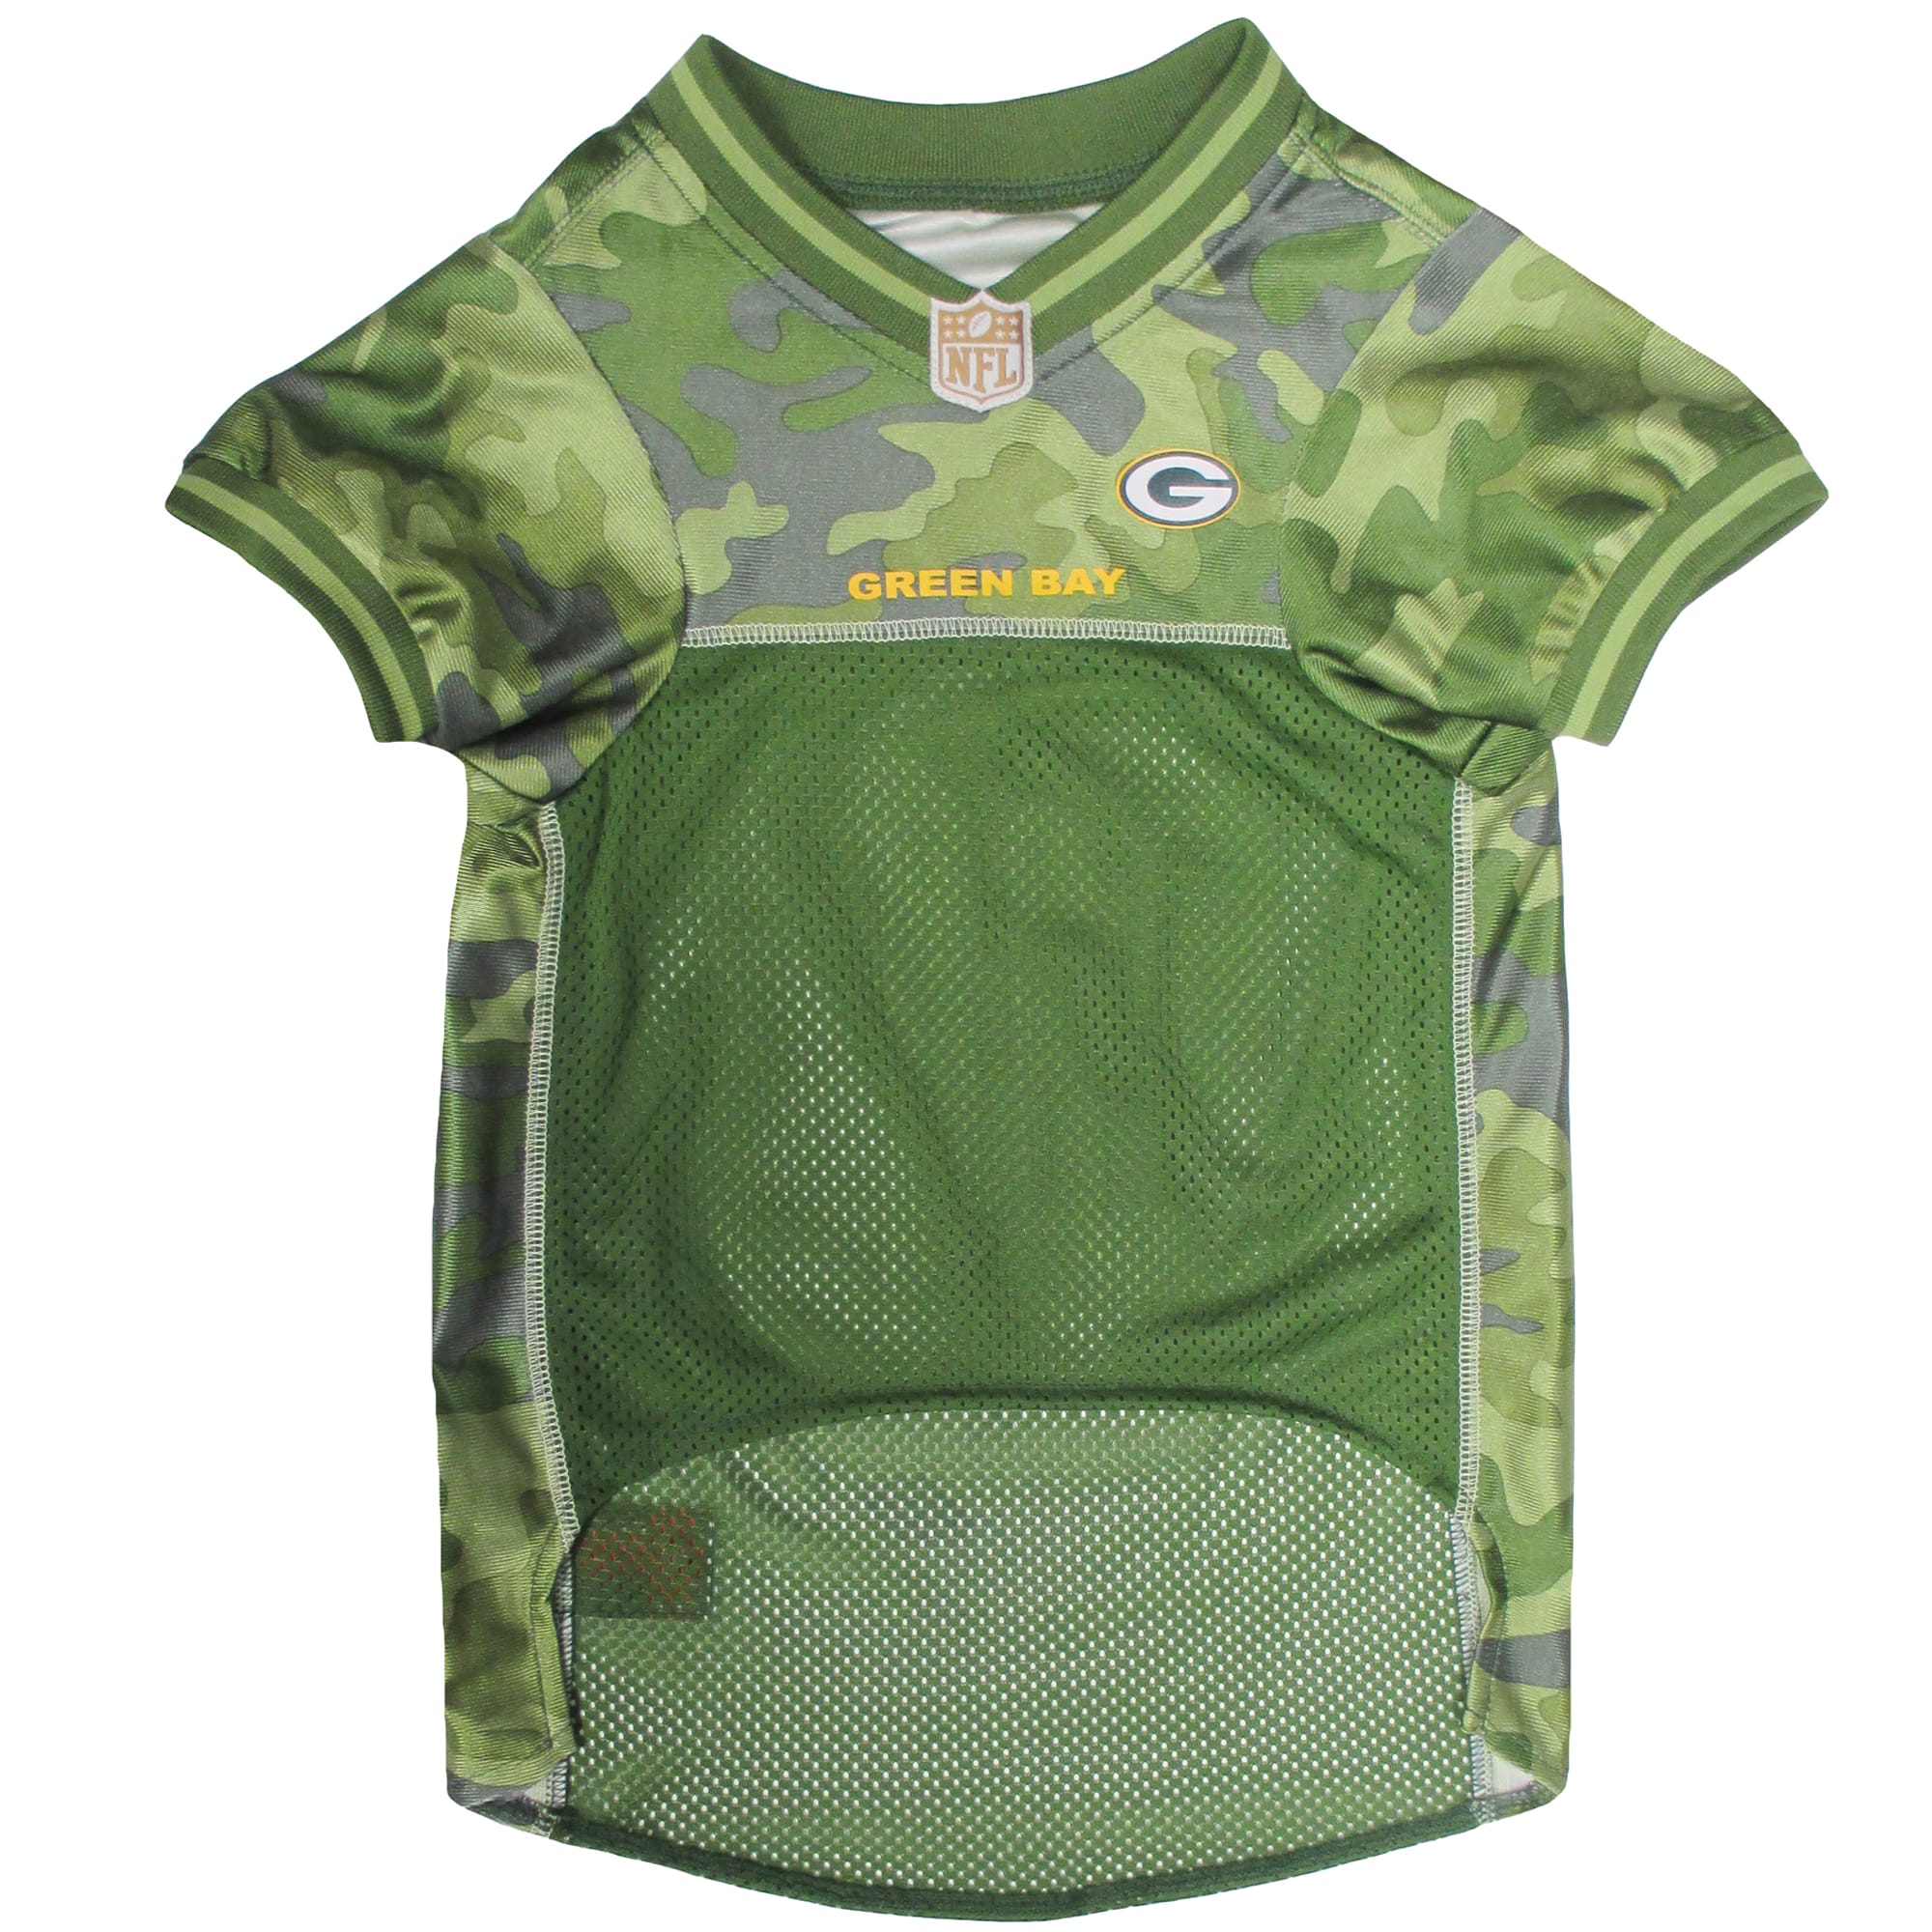 Pets First Green Bay Packers Camo Jersey, X-Small